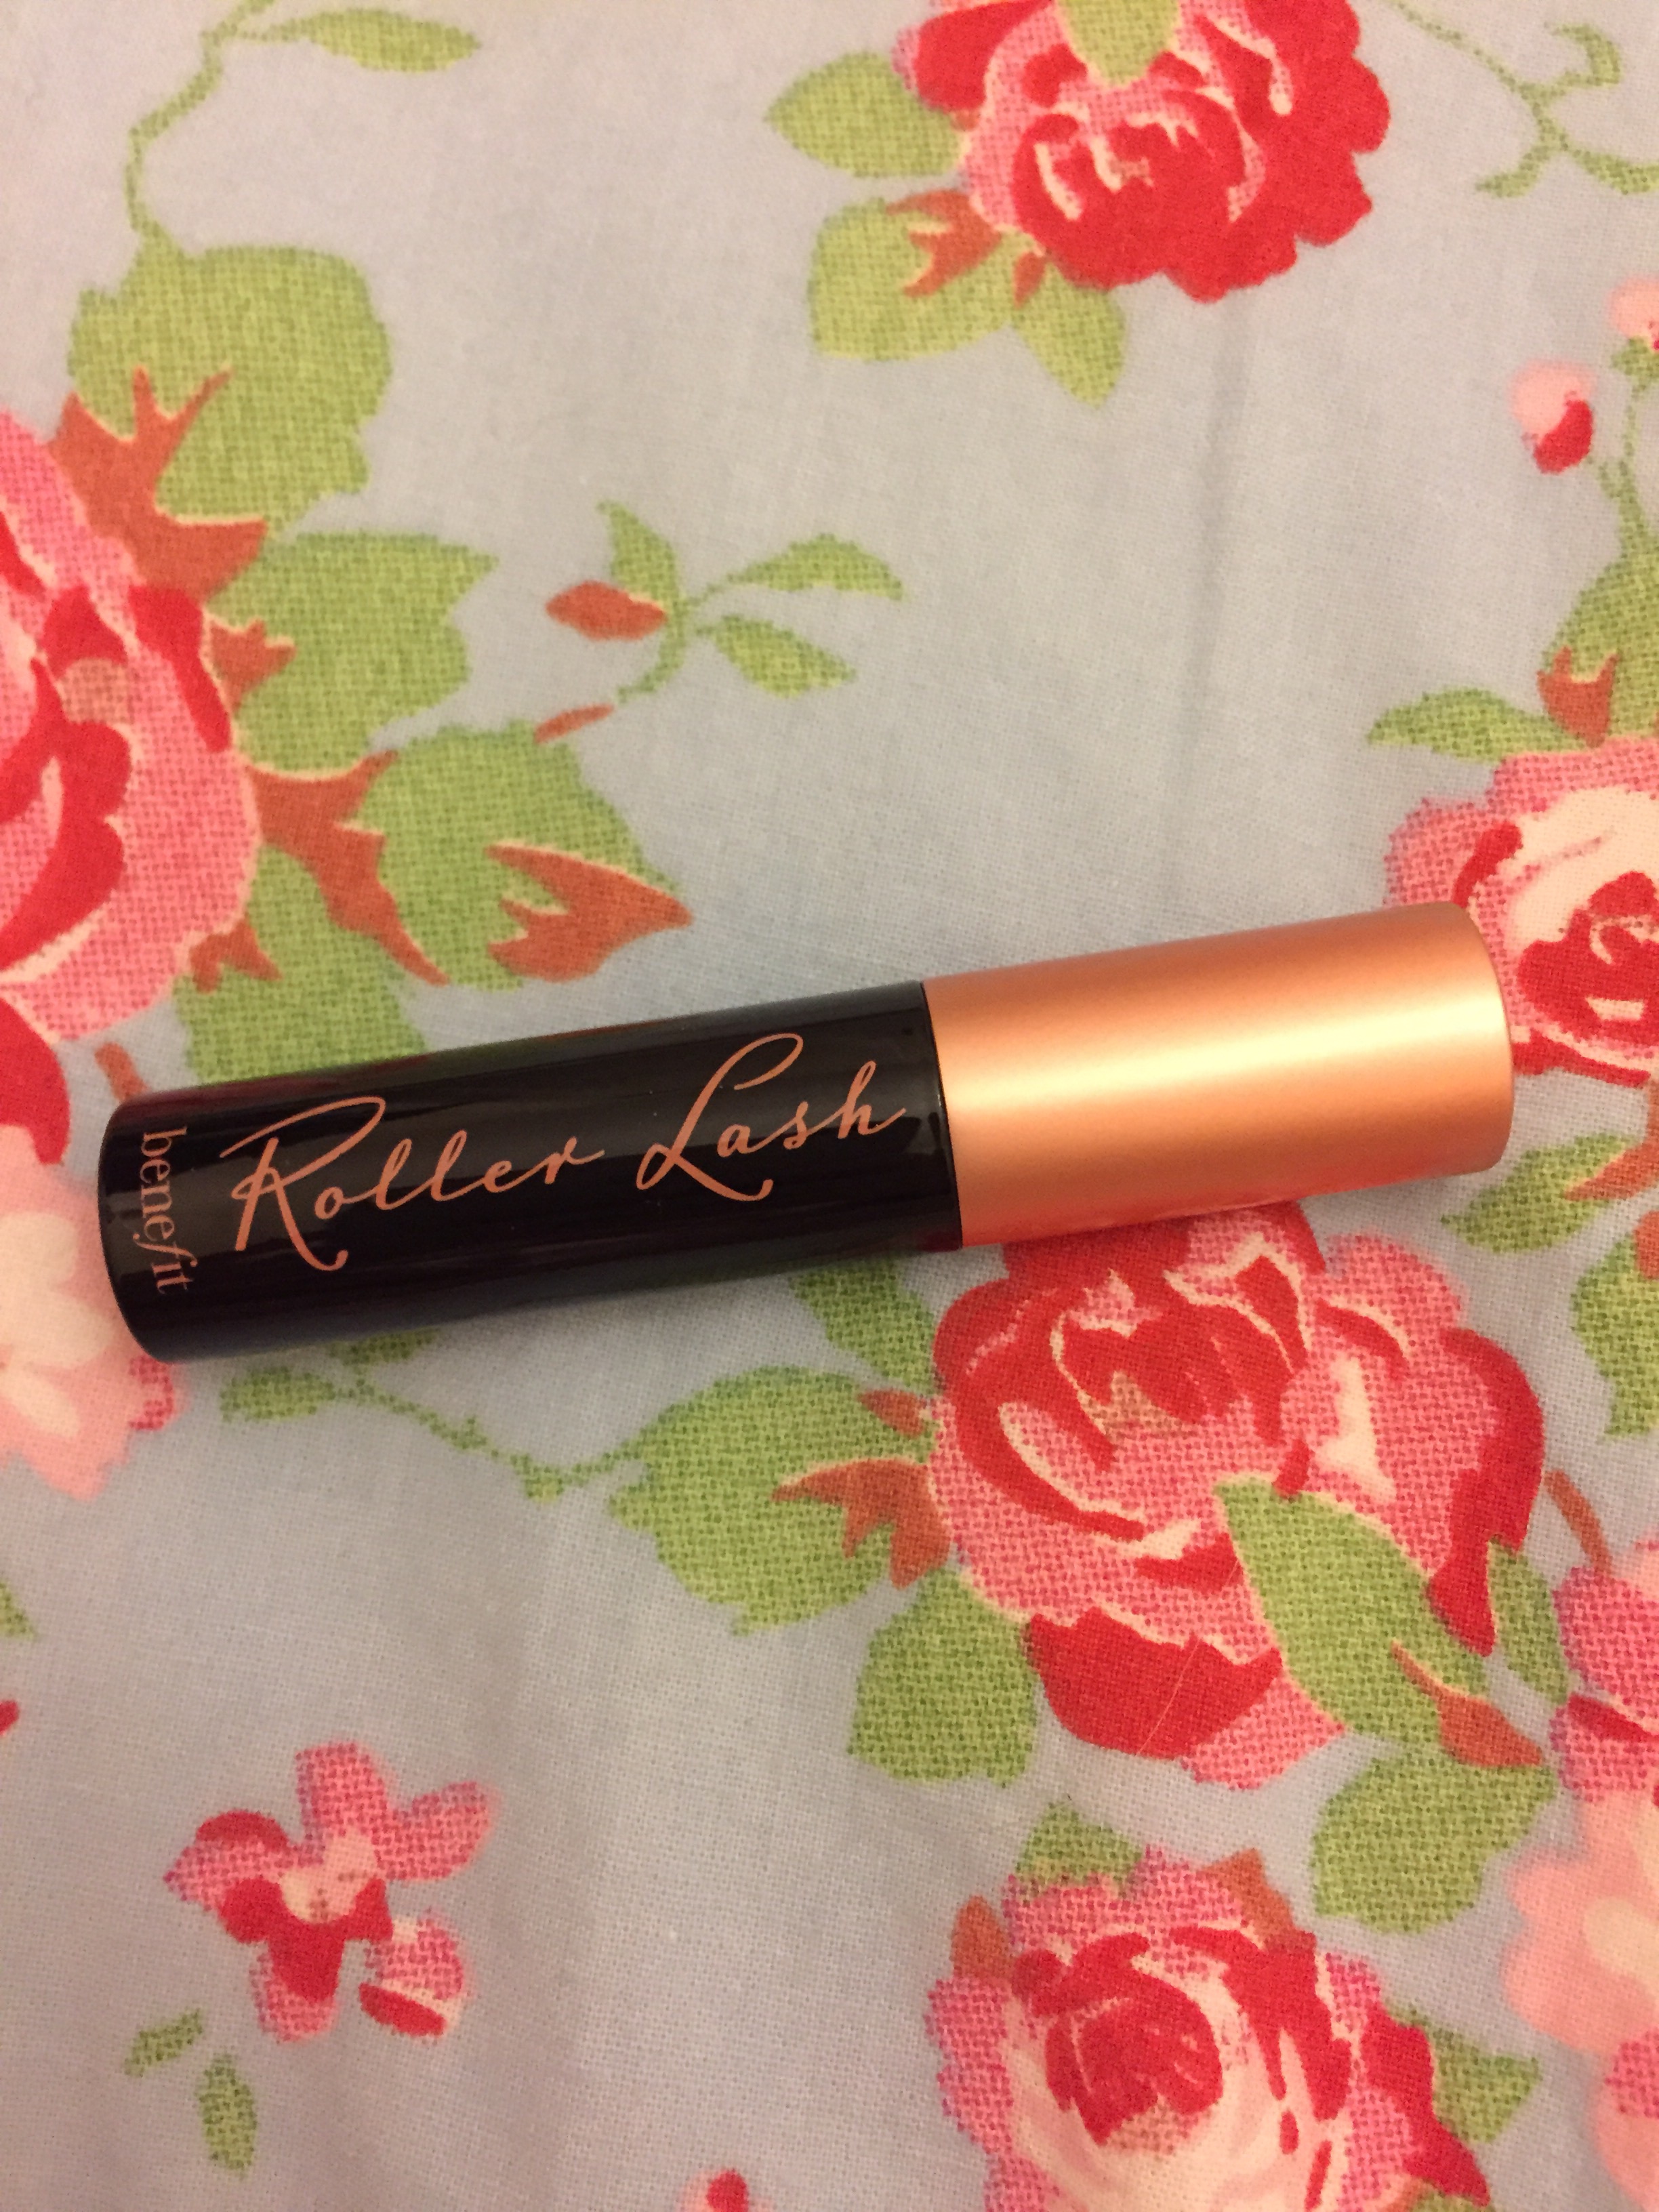 New Benefit Roller Review! and After Lash Gigi by Beauty | pics!!) Mascara (Before